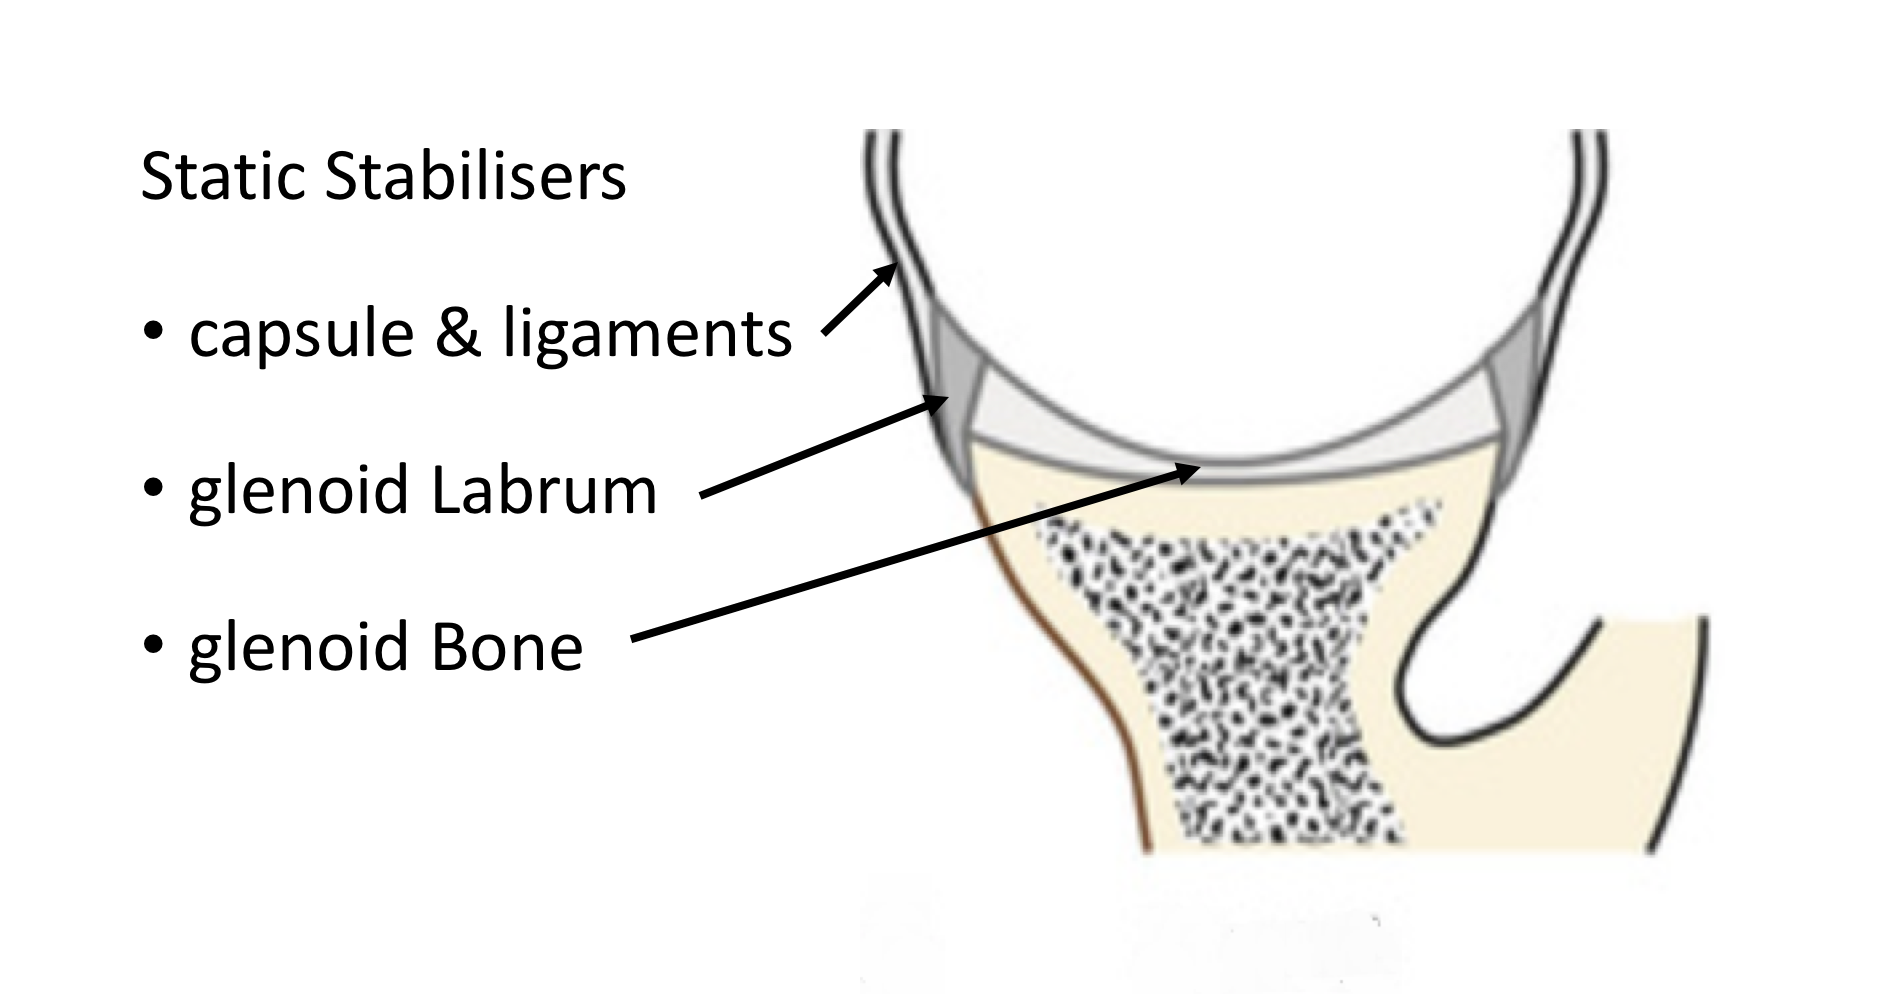 Fig 3. Static Stabilisers - Glenoid, Labrum and Ligaments